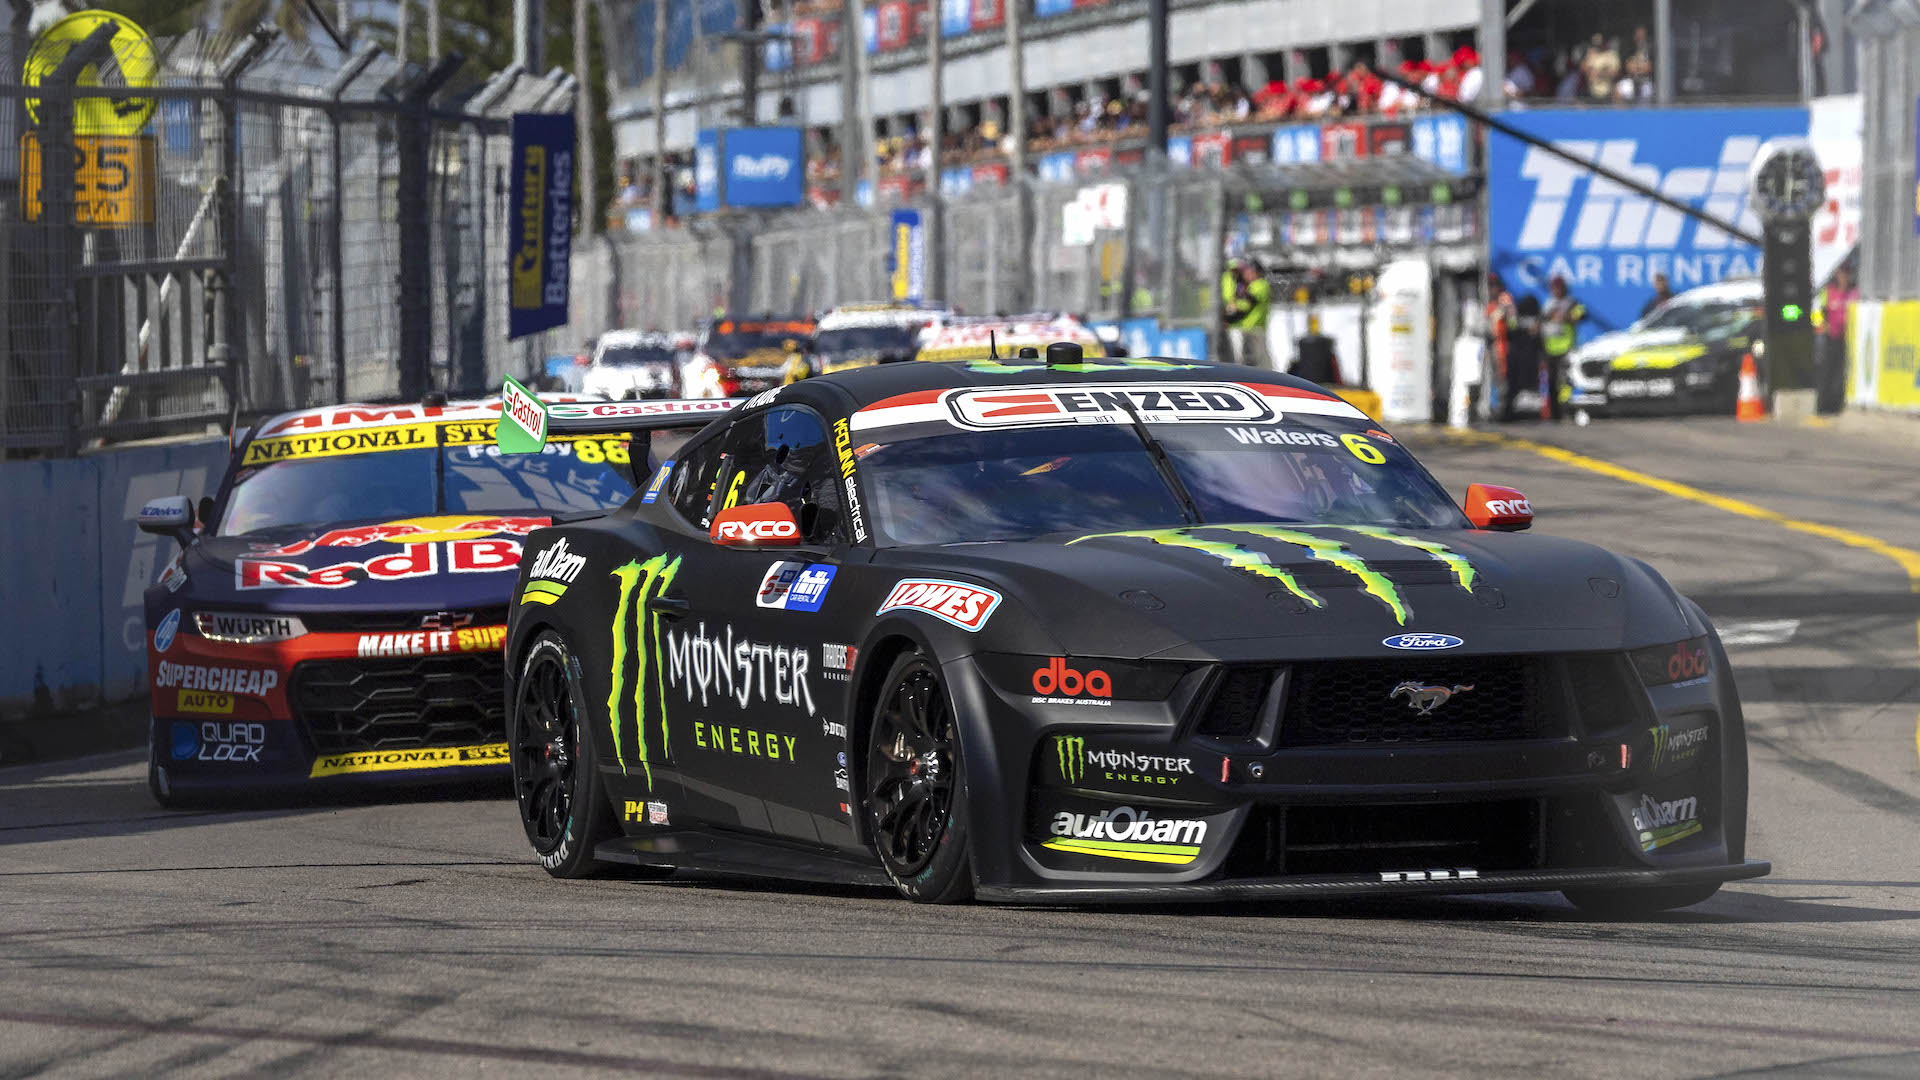 New Ford Mustang takes first Australian Supercars victory